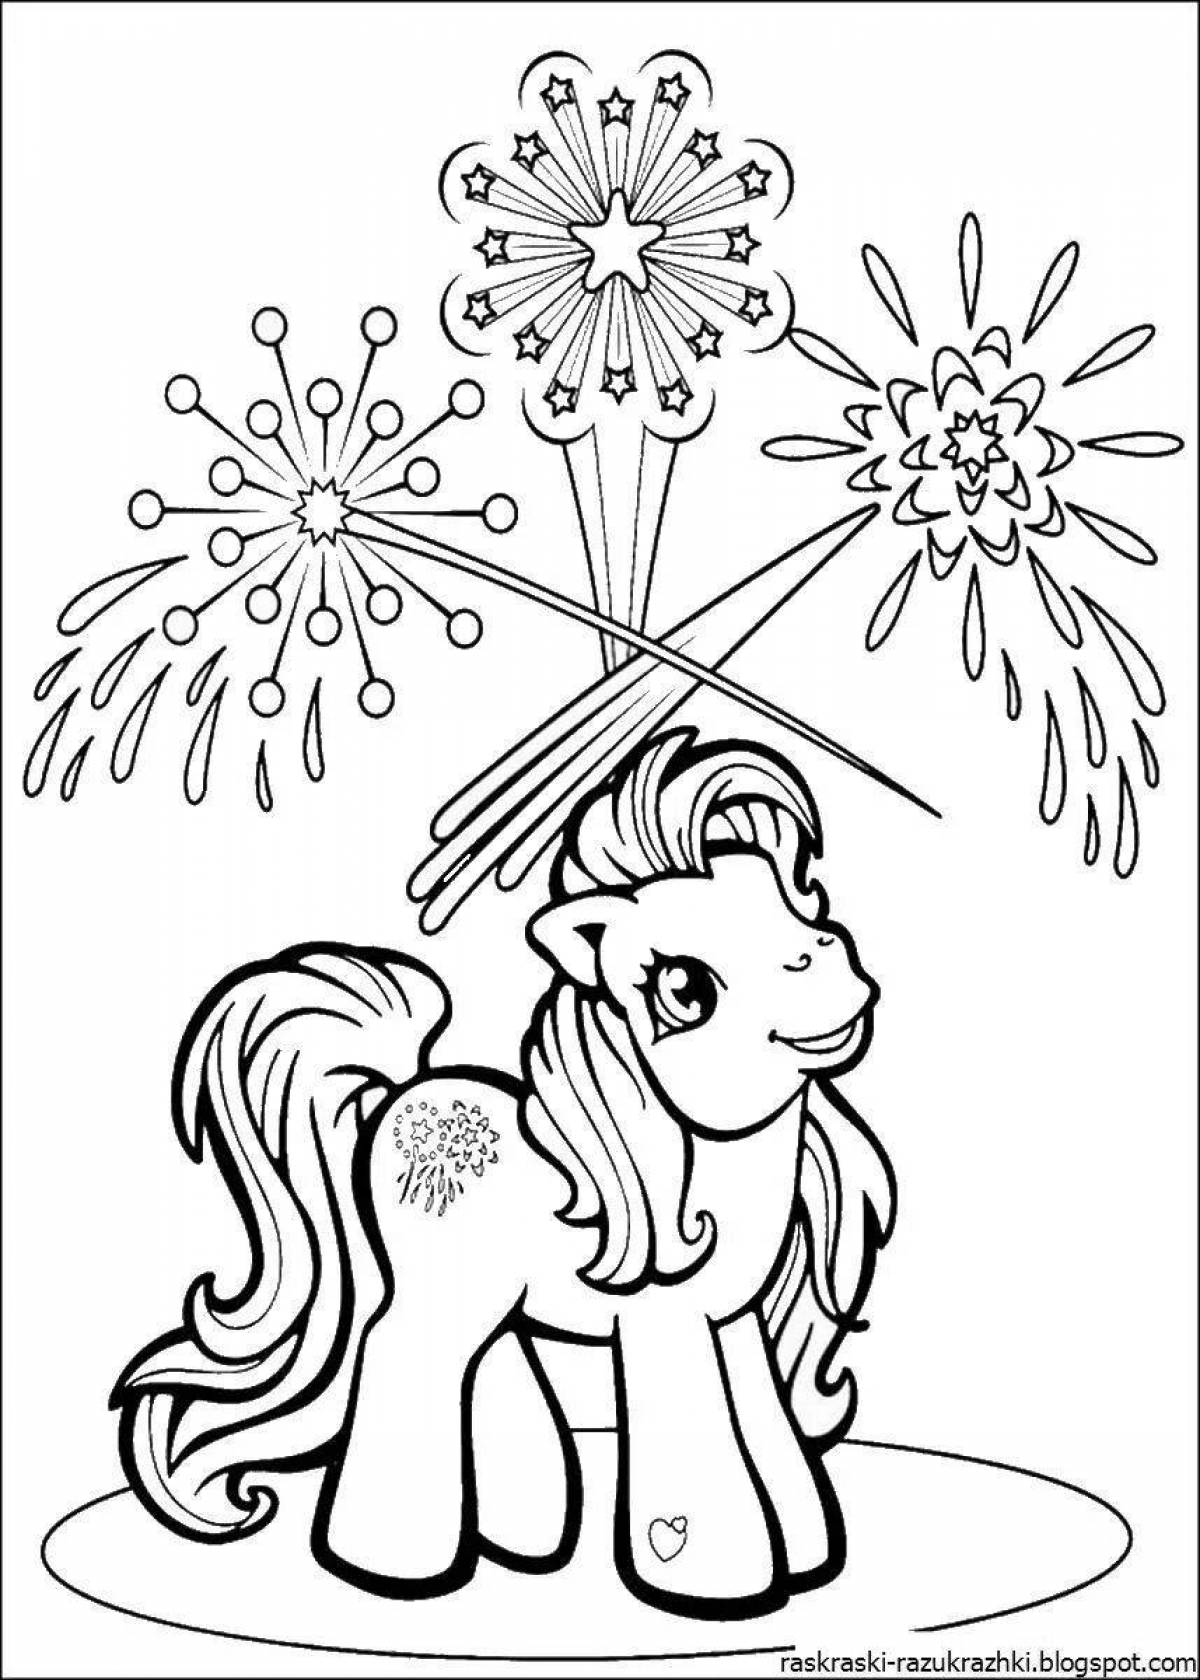 Fun coloring book for girls 9-10 years old